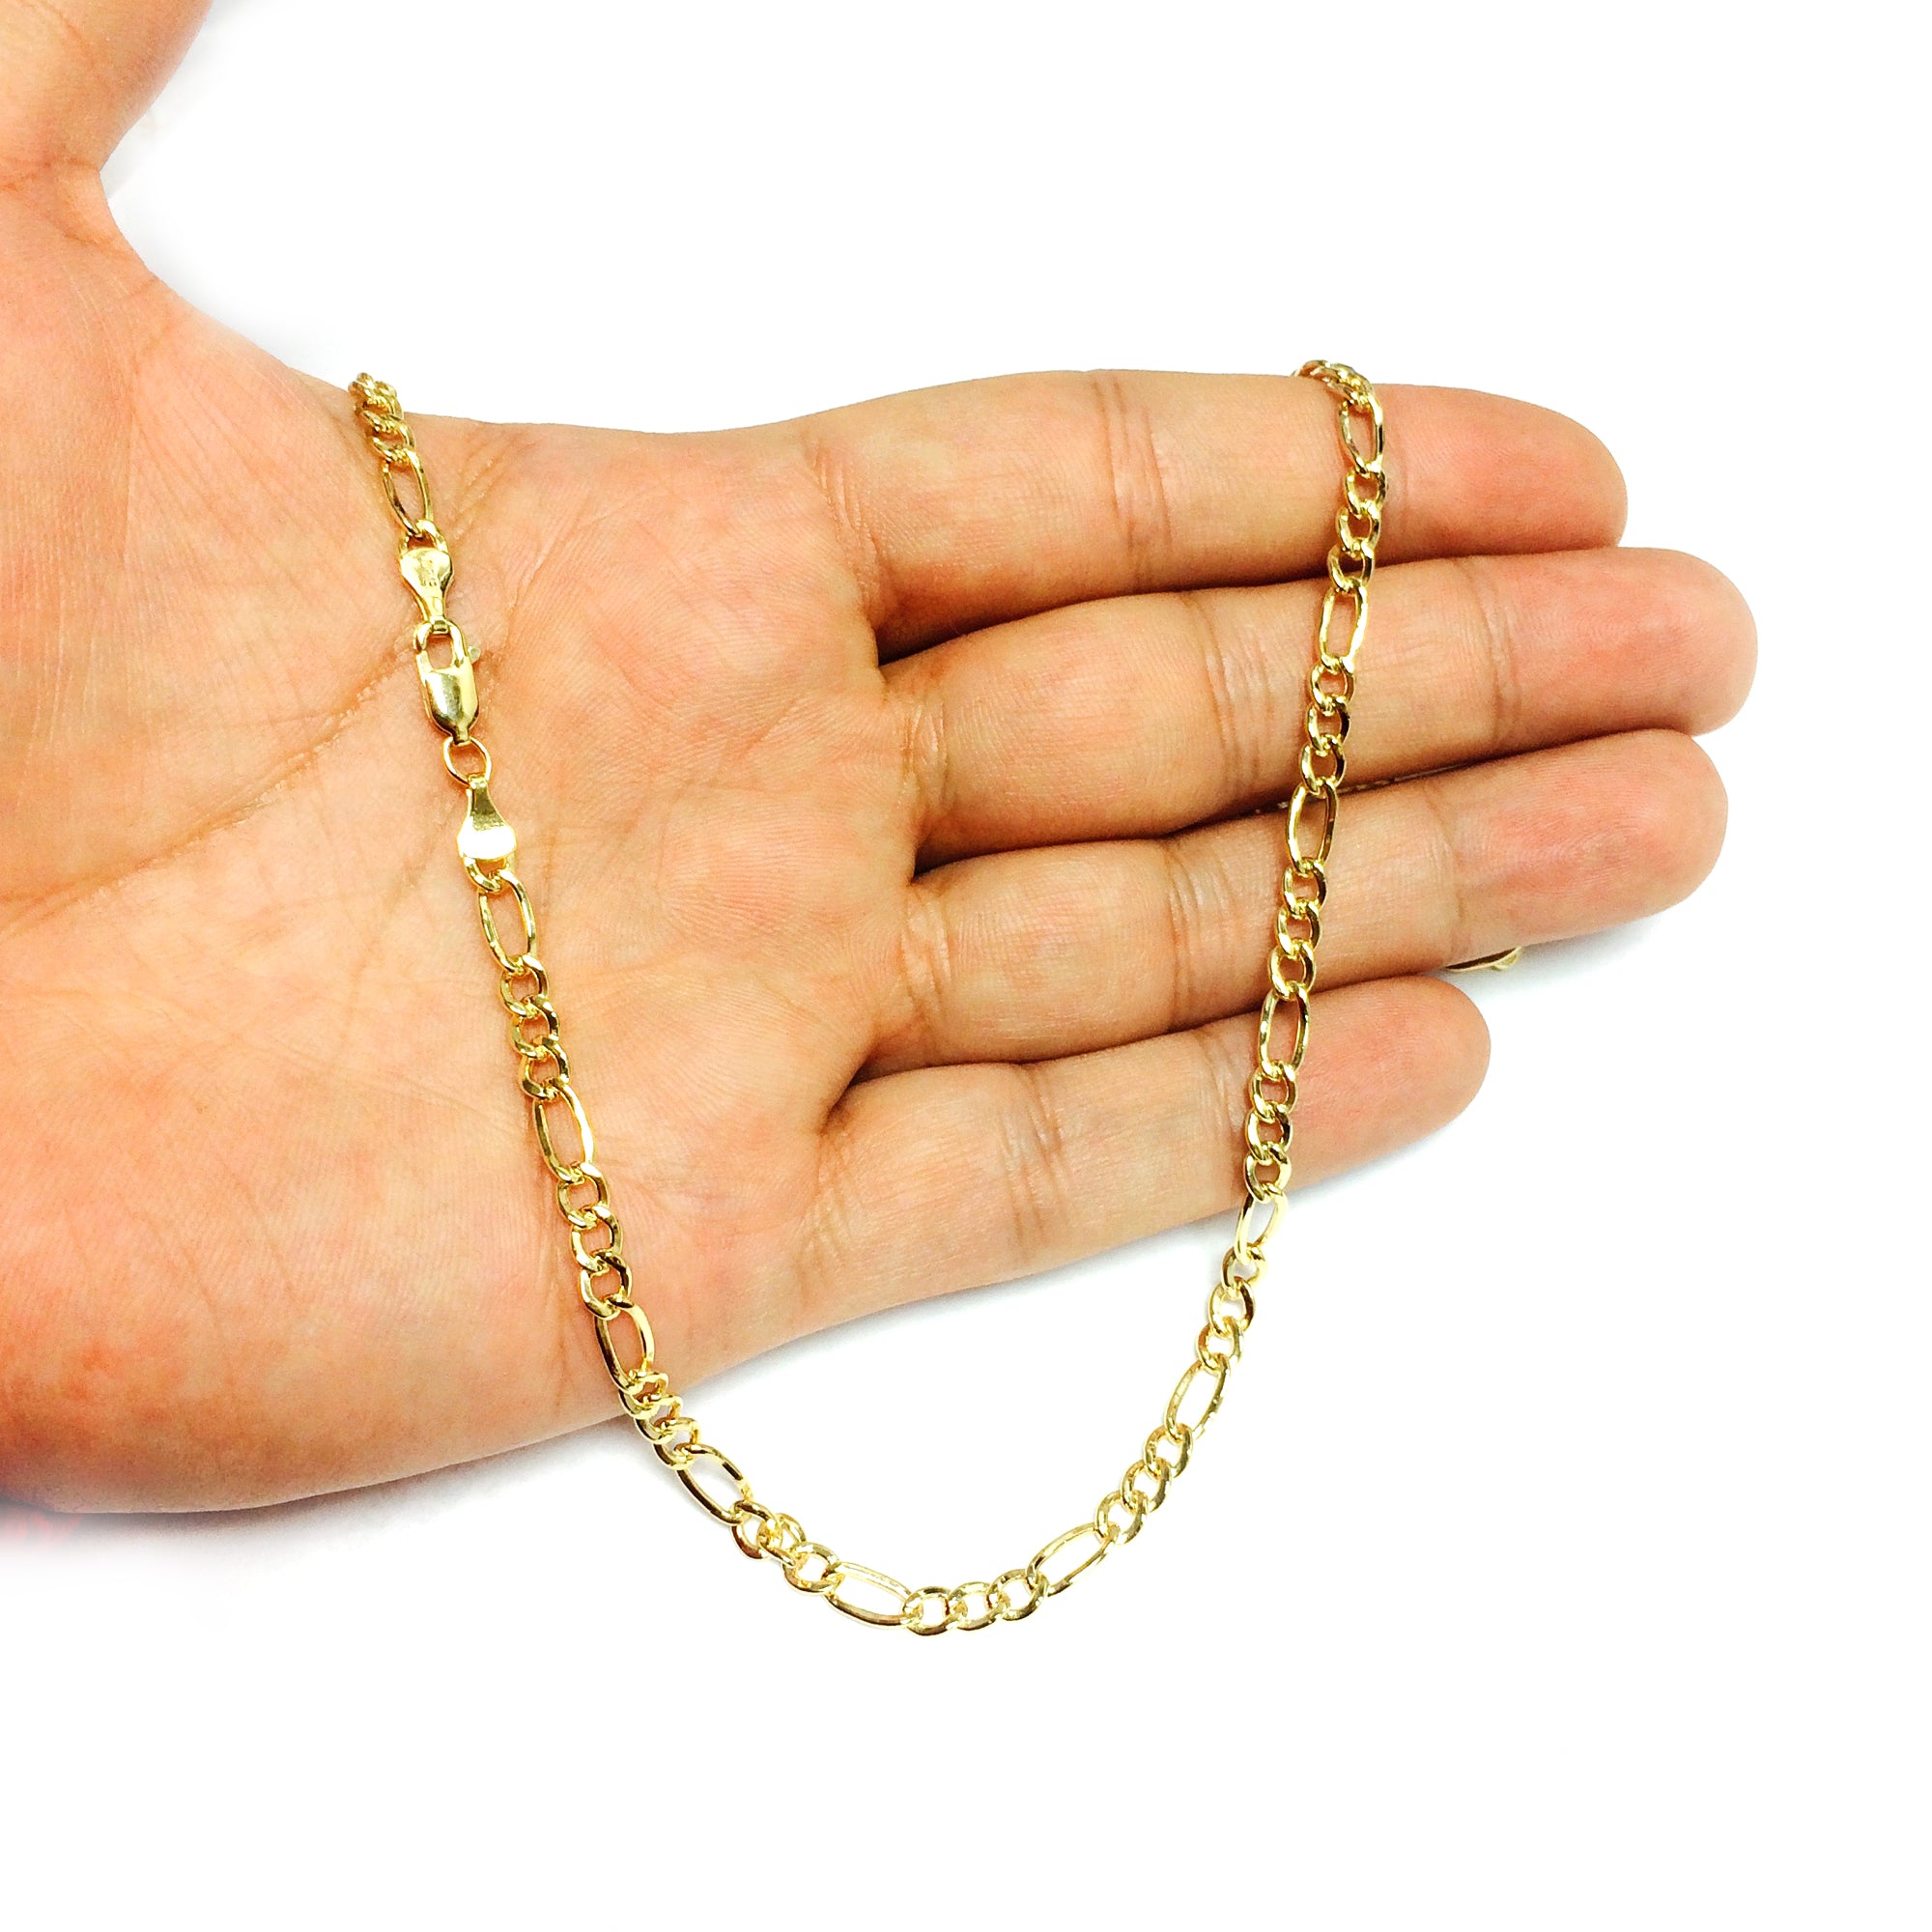 14K Yellow Gold Filled Solid Figaro Chain Necklace, 4.0 mm Wide